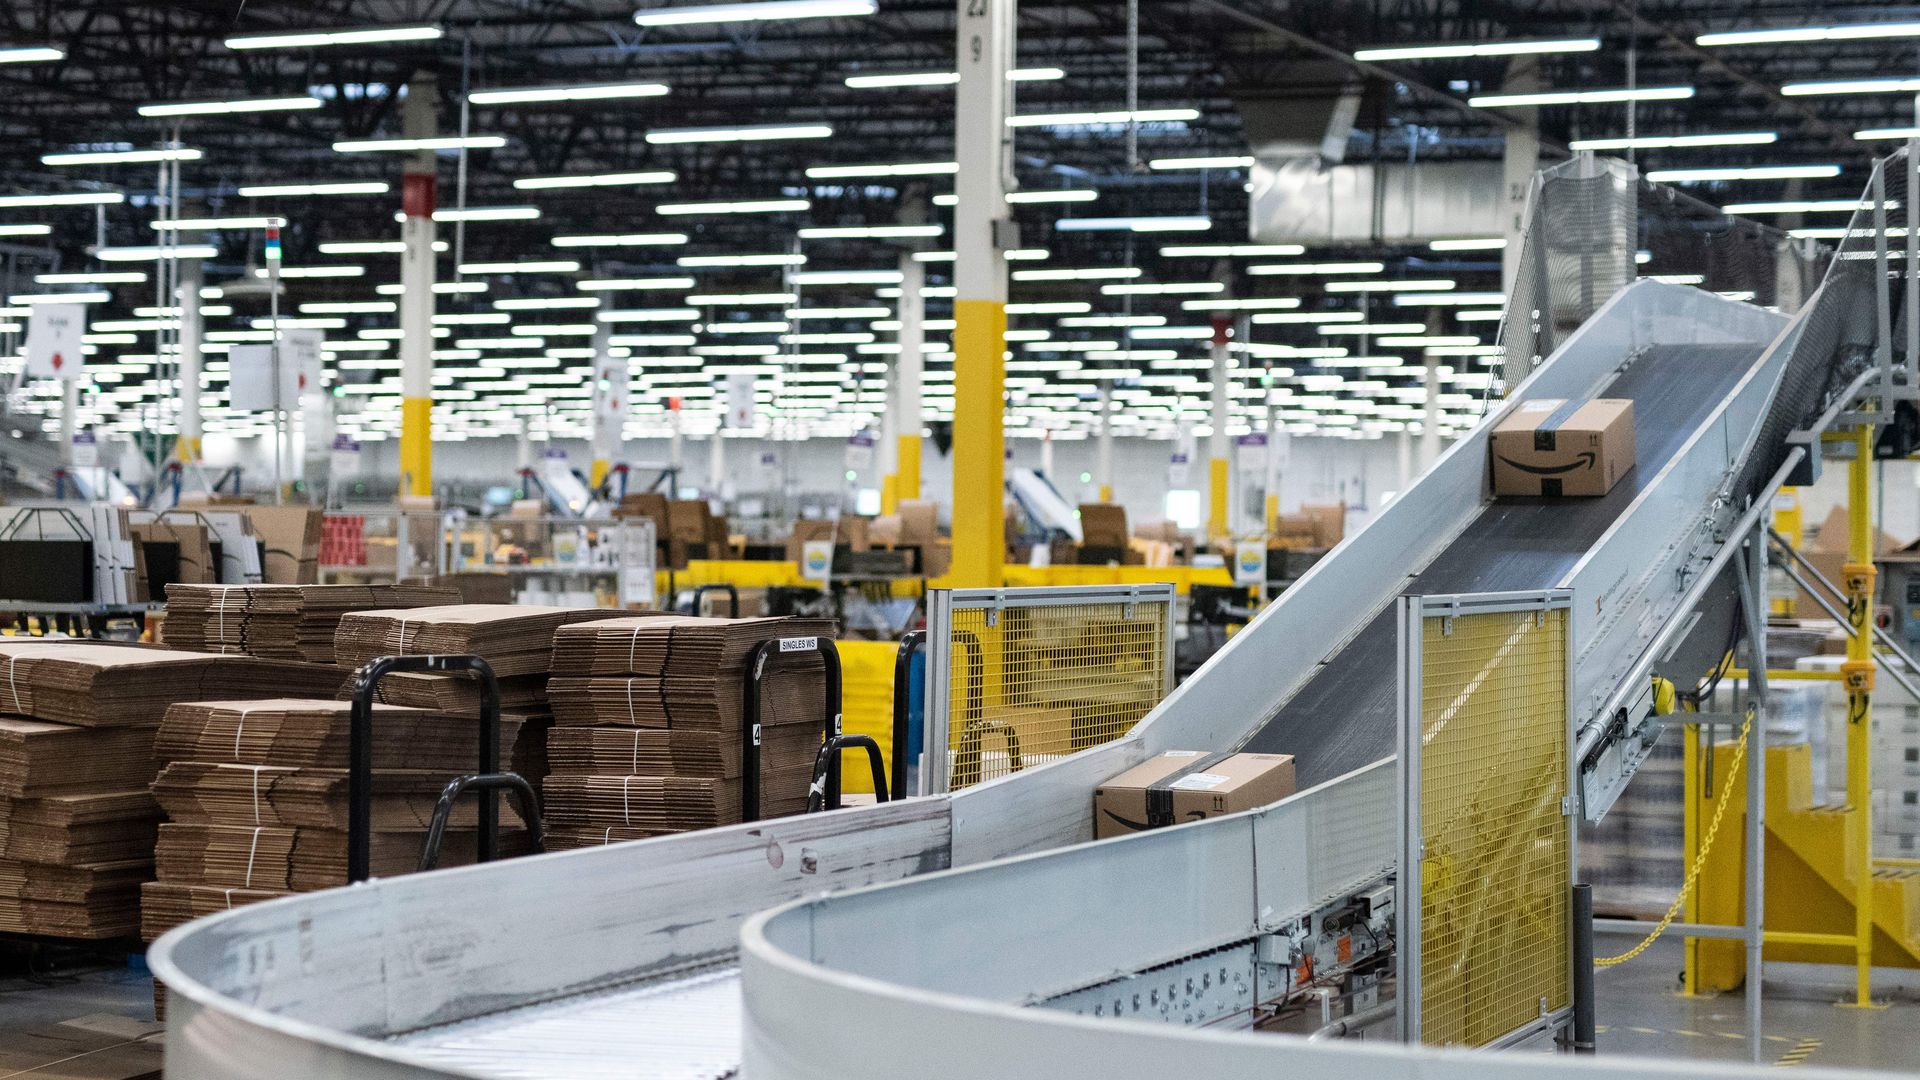 Package moves along conveyer belt in warehouse